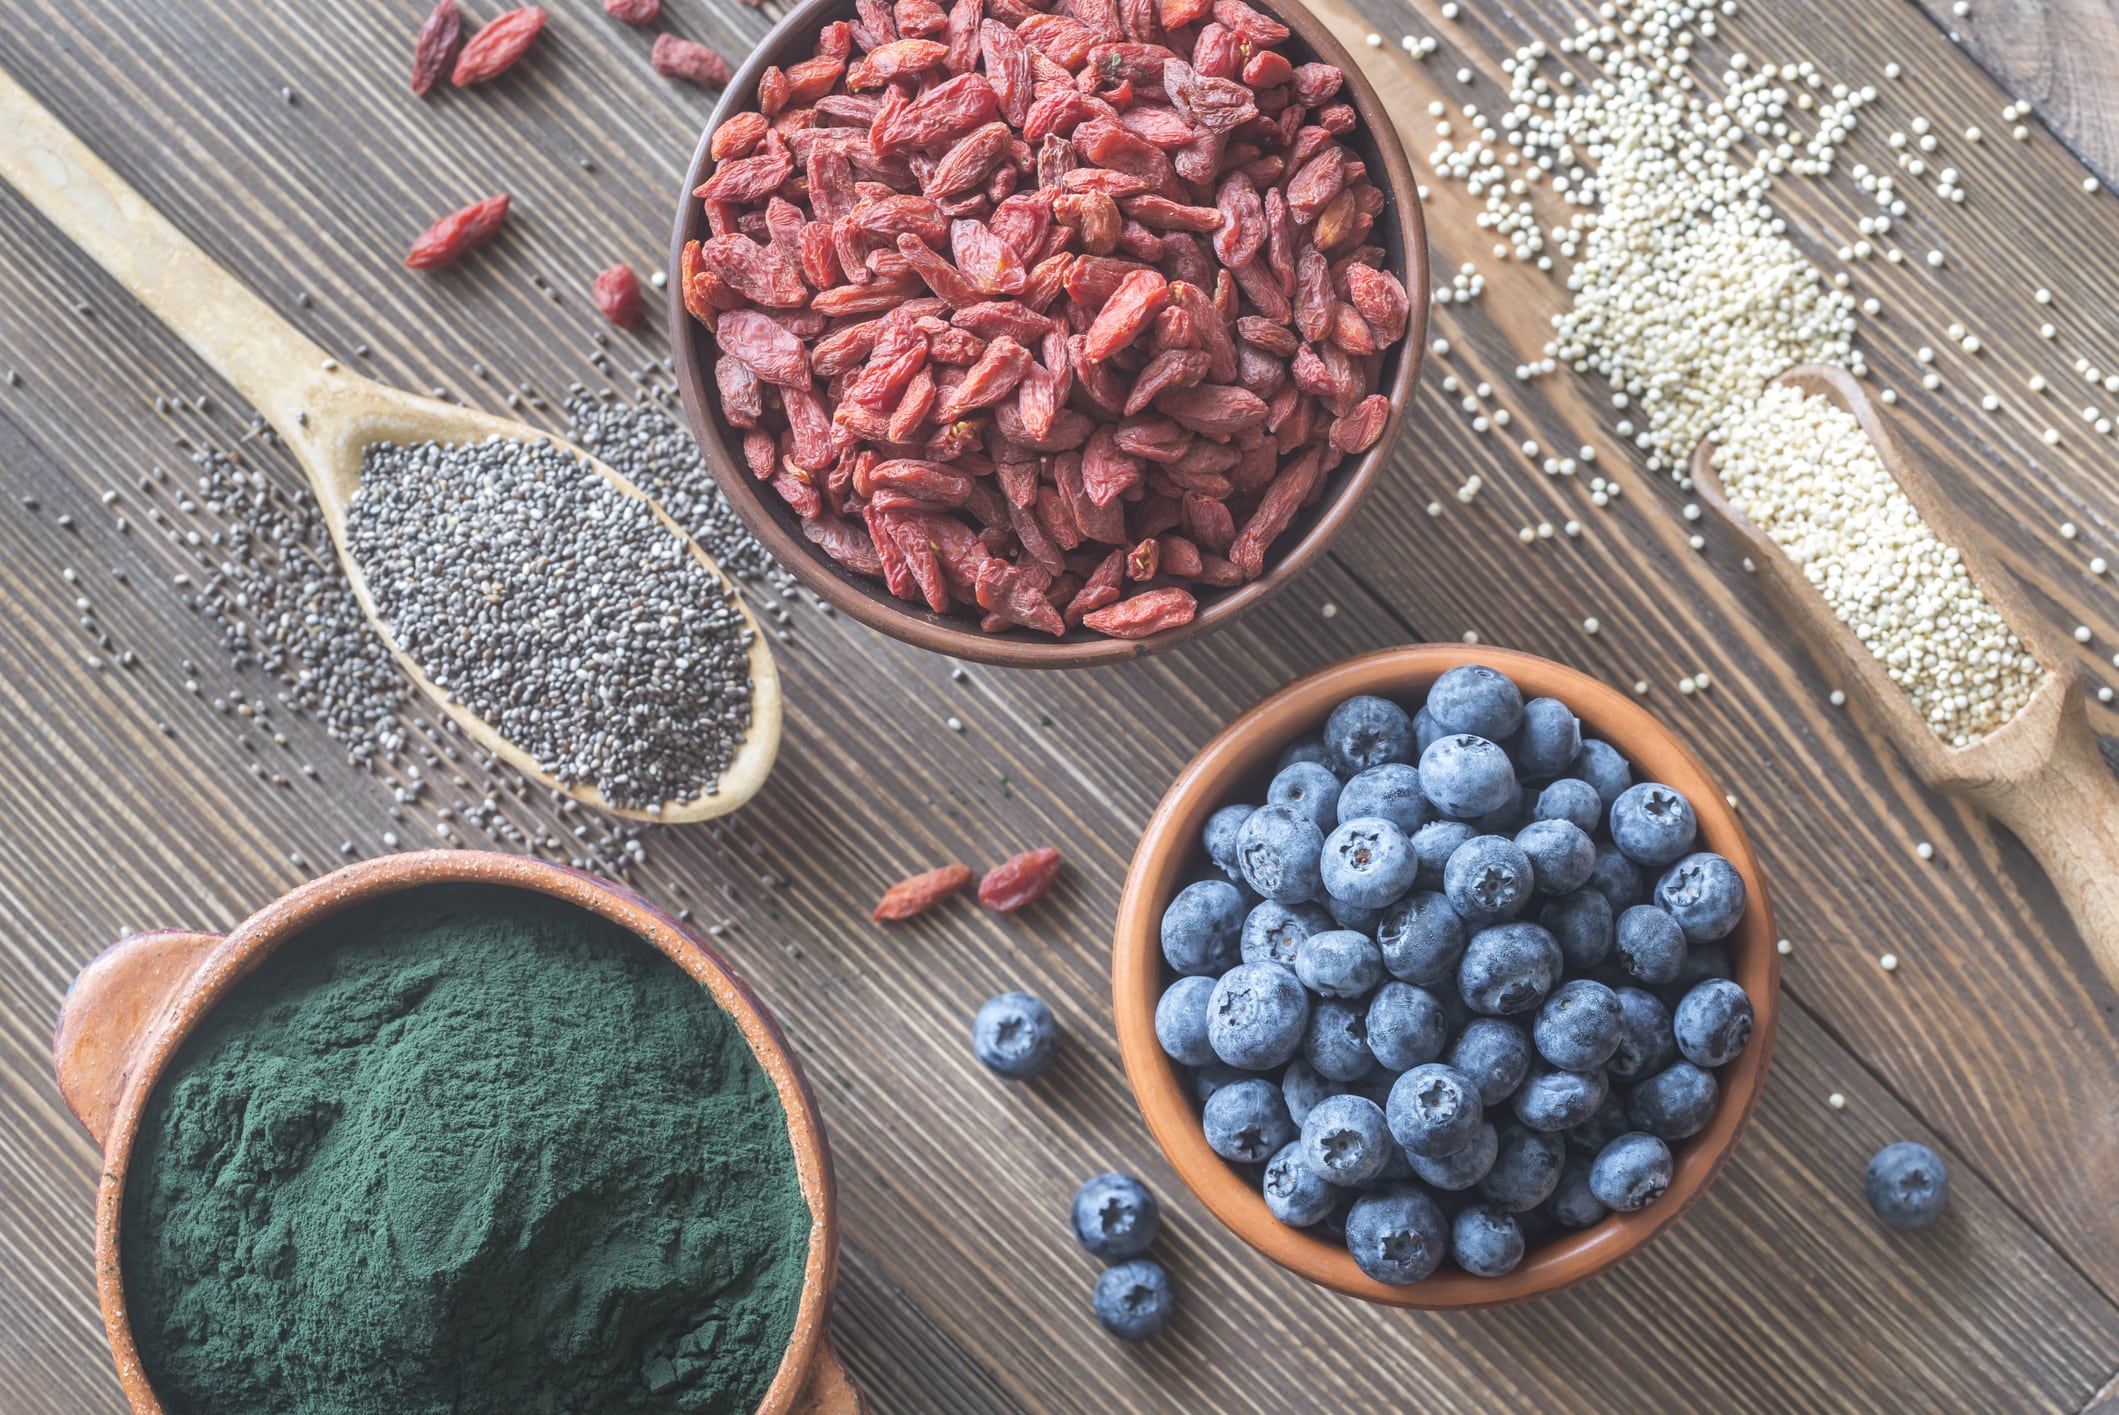 Should You Put Stock in Superfoods?